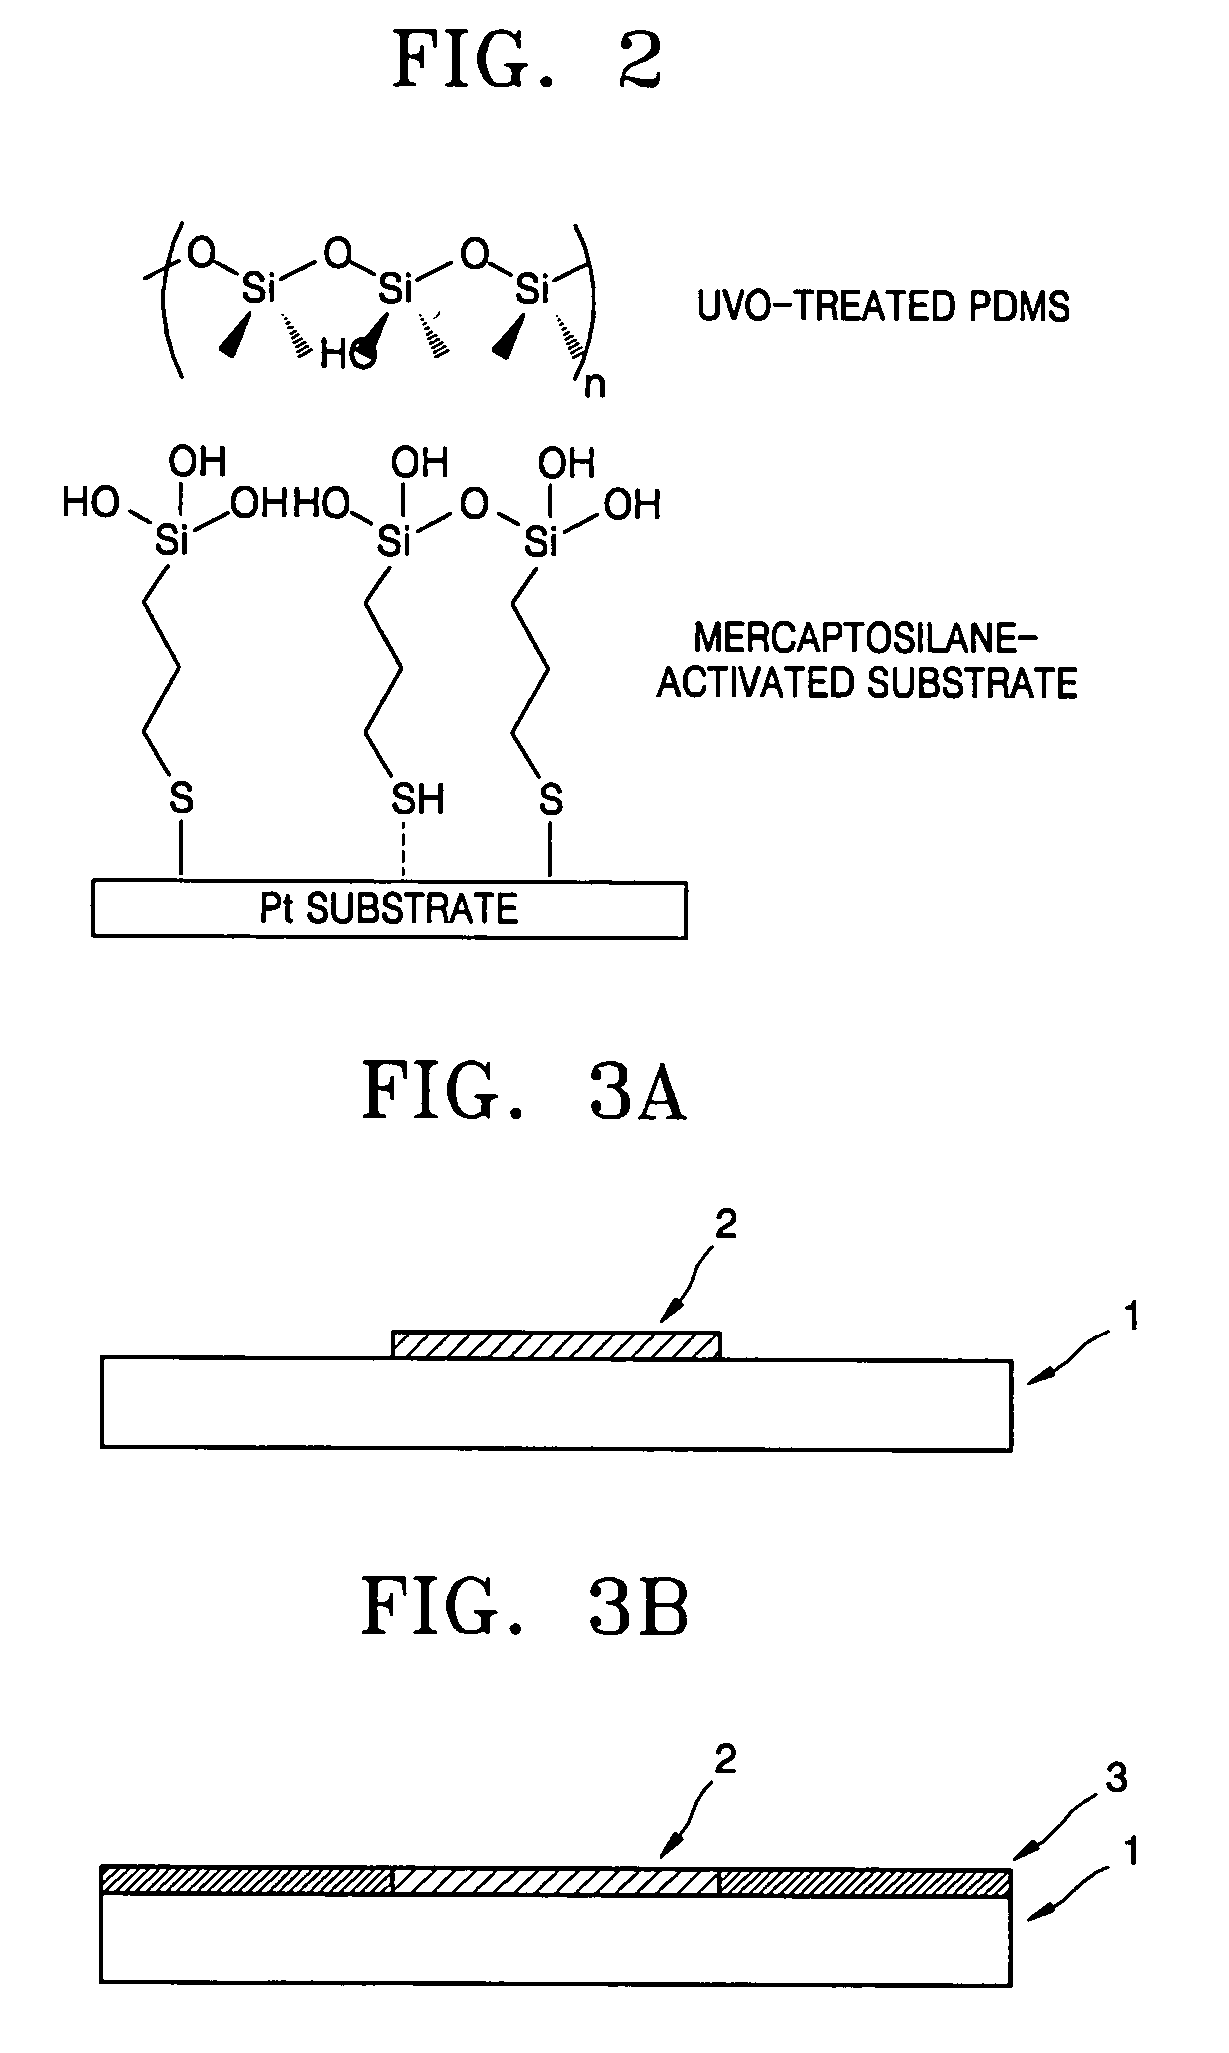 Microfluidic device and method of manufacturing the same